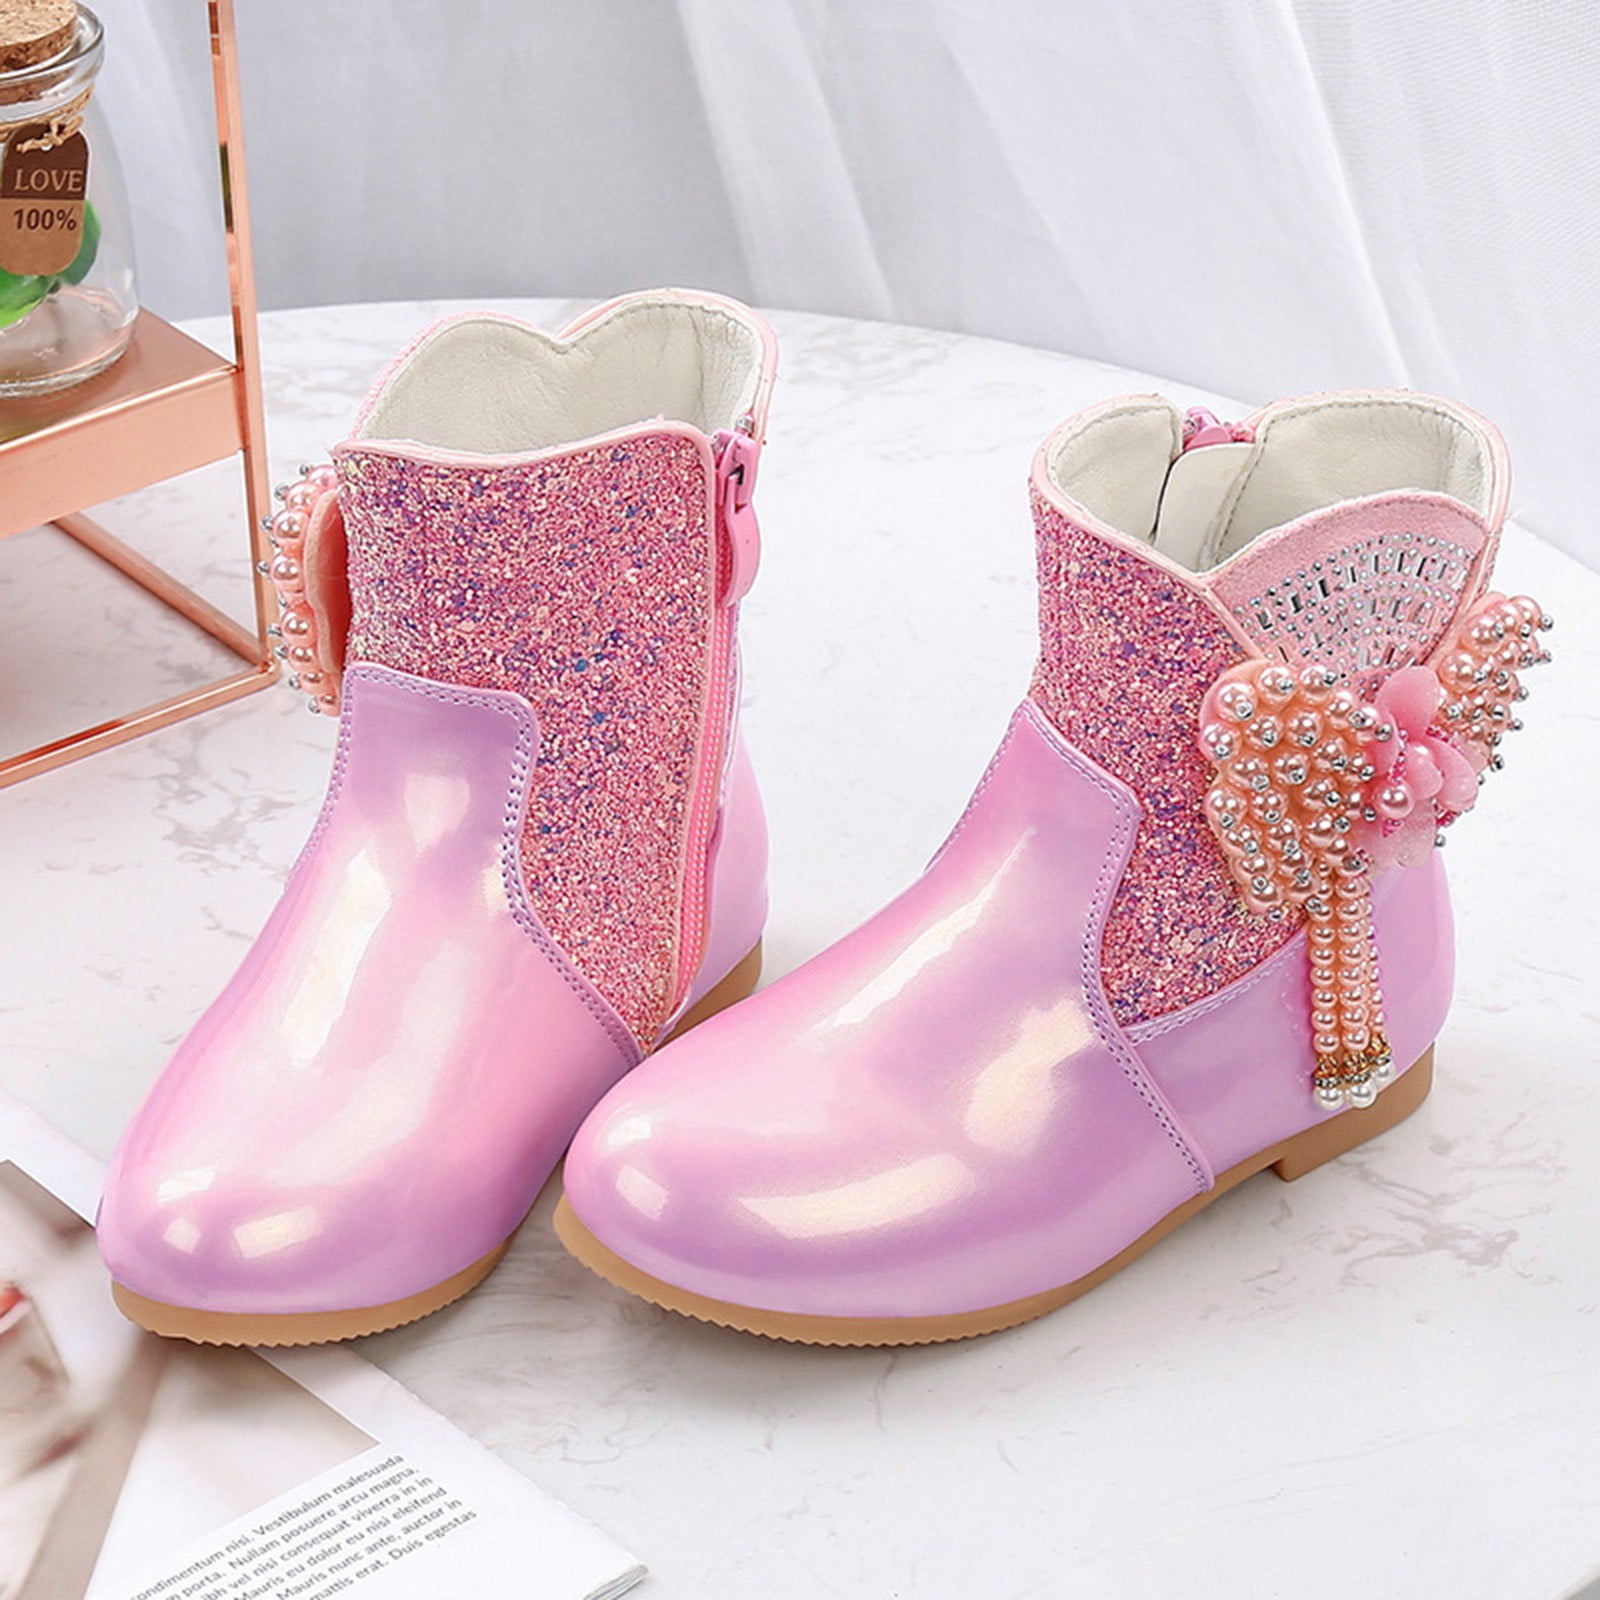 Children Shoes Boots 10 Years Old Girl | Boots Heel Shoes Girl 10 Years -  High-heeled - Aliexpress